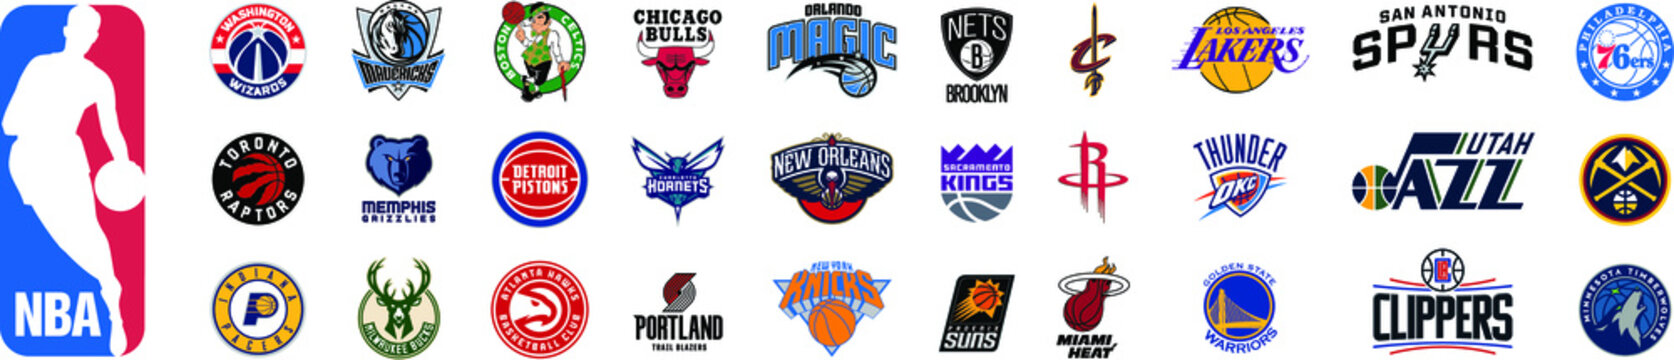 NBA basketball all logos teams set vector. Isolated NBA basket-ball conferences : Lakers, Celtics, Clippers, Knicks, Chicago Bulls, Hawks, Hornets, Wizards, Suns, Nets